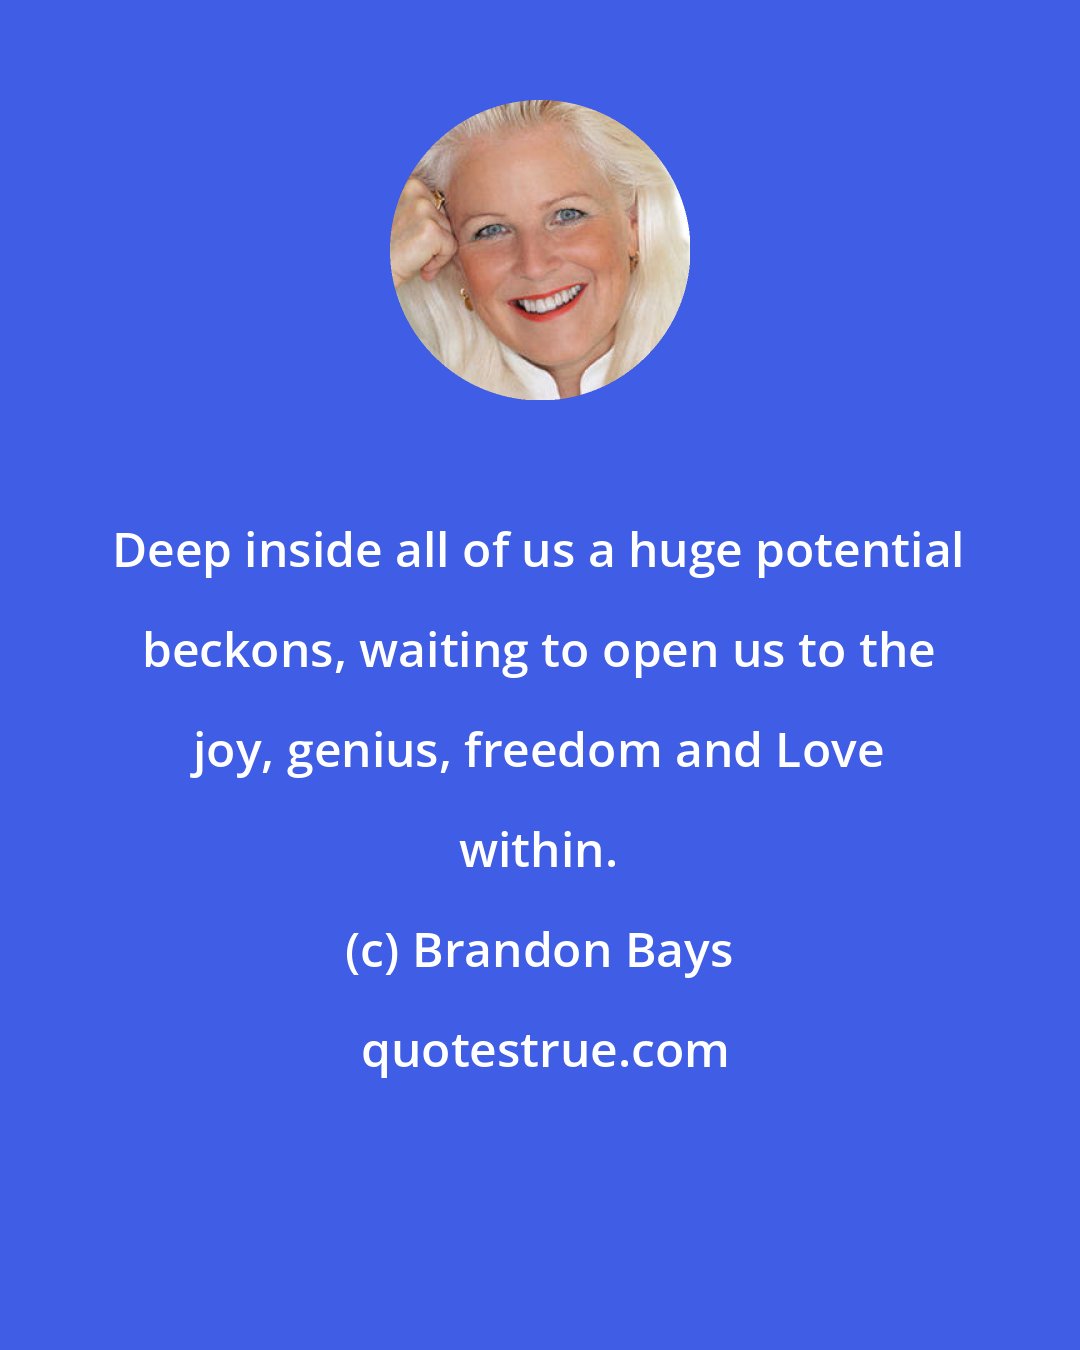 Brandon Bays: Deep inside all of us a huge potential beckons, waiting to open us to the joy, genius, freedom and Love within.